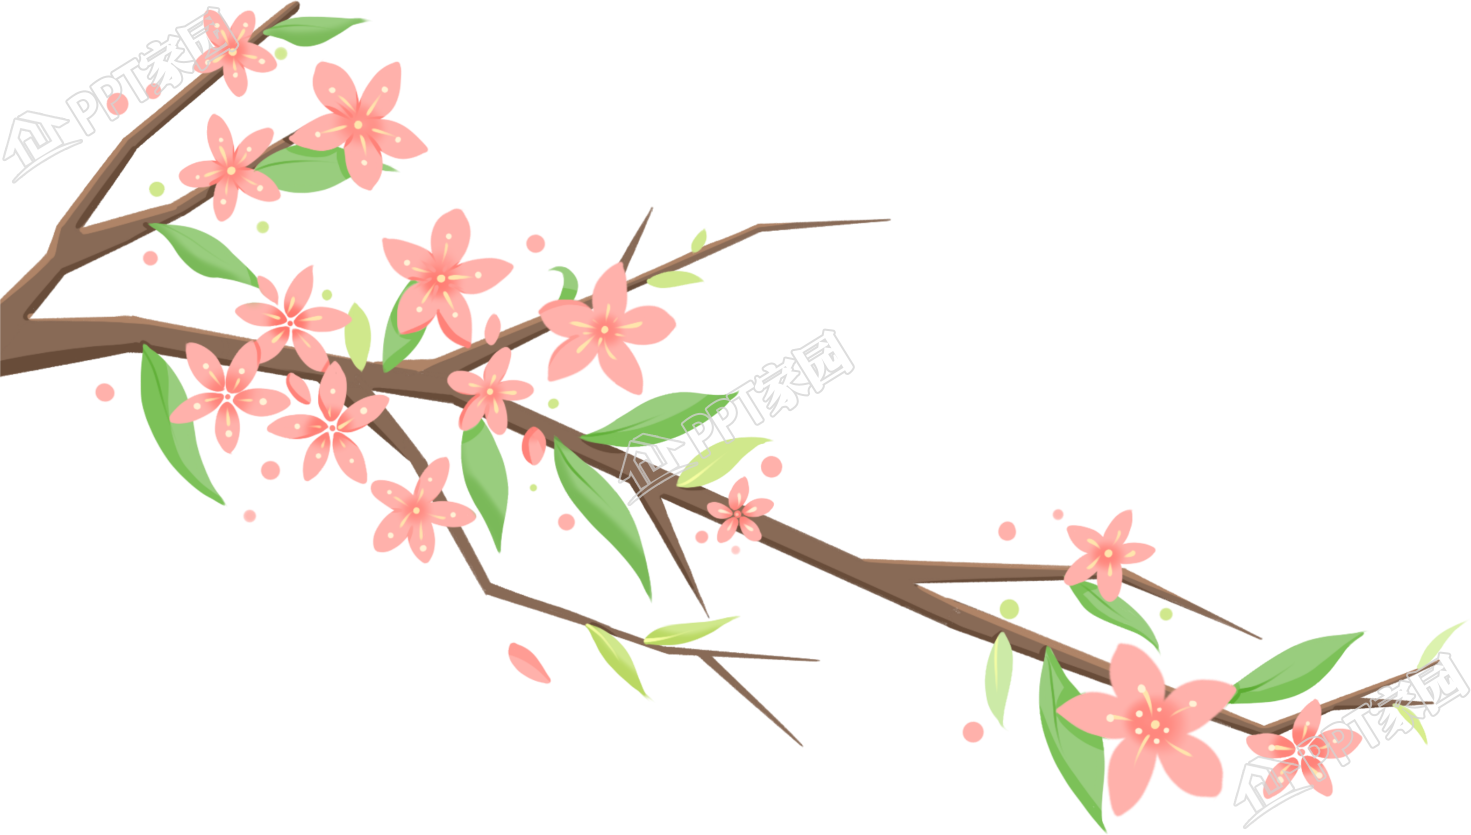 Spring theme pink flower branch picture free material download recommended